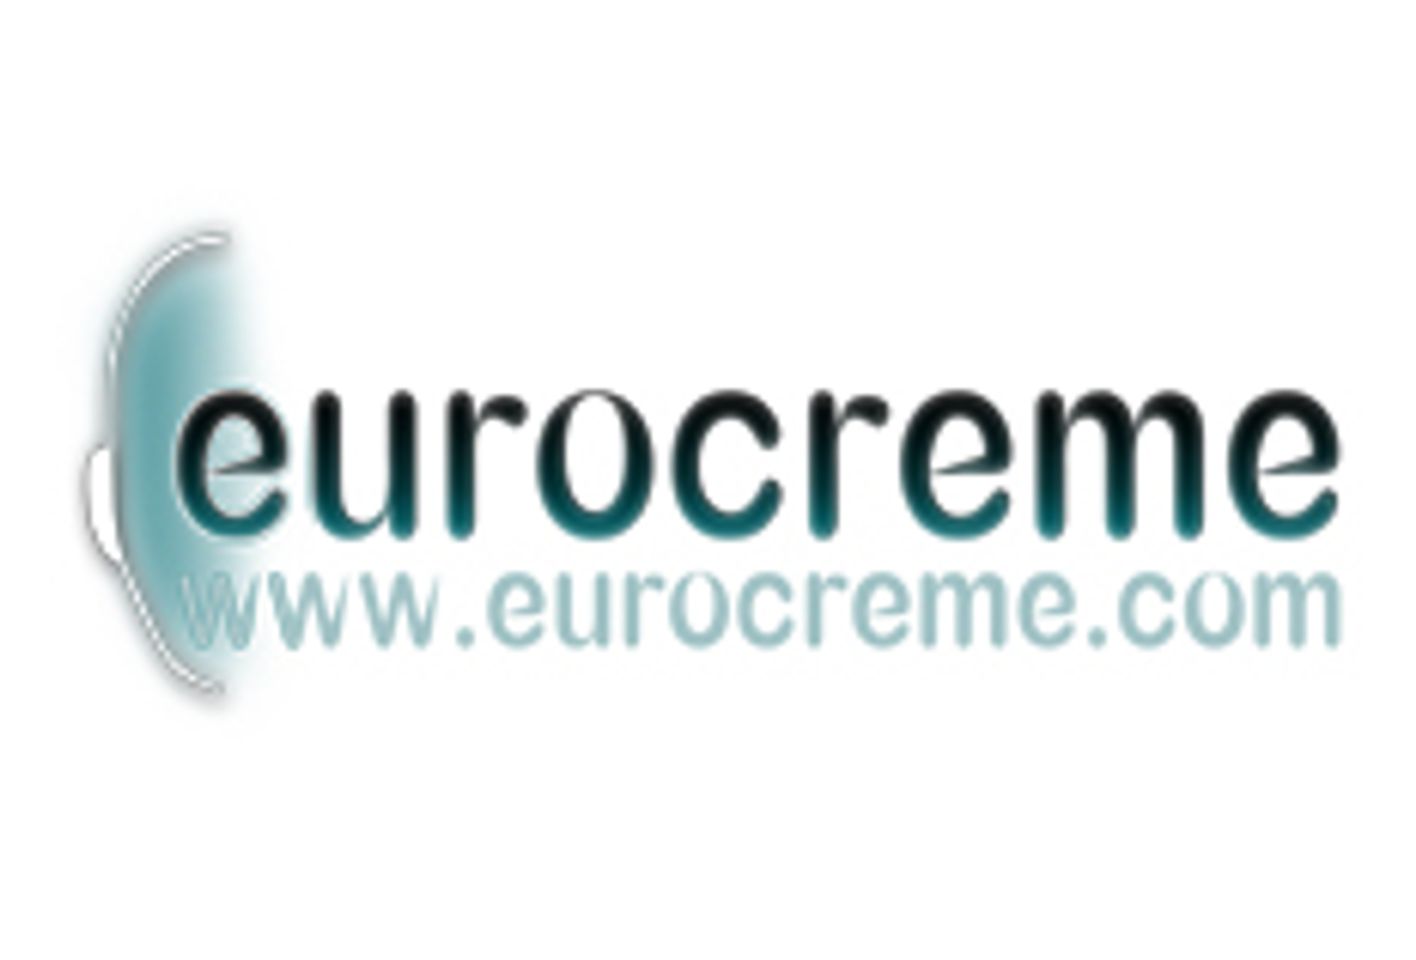 Eurocreme Group Announces Billy Rubens as Latest Exclusive Model